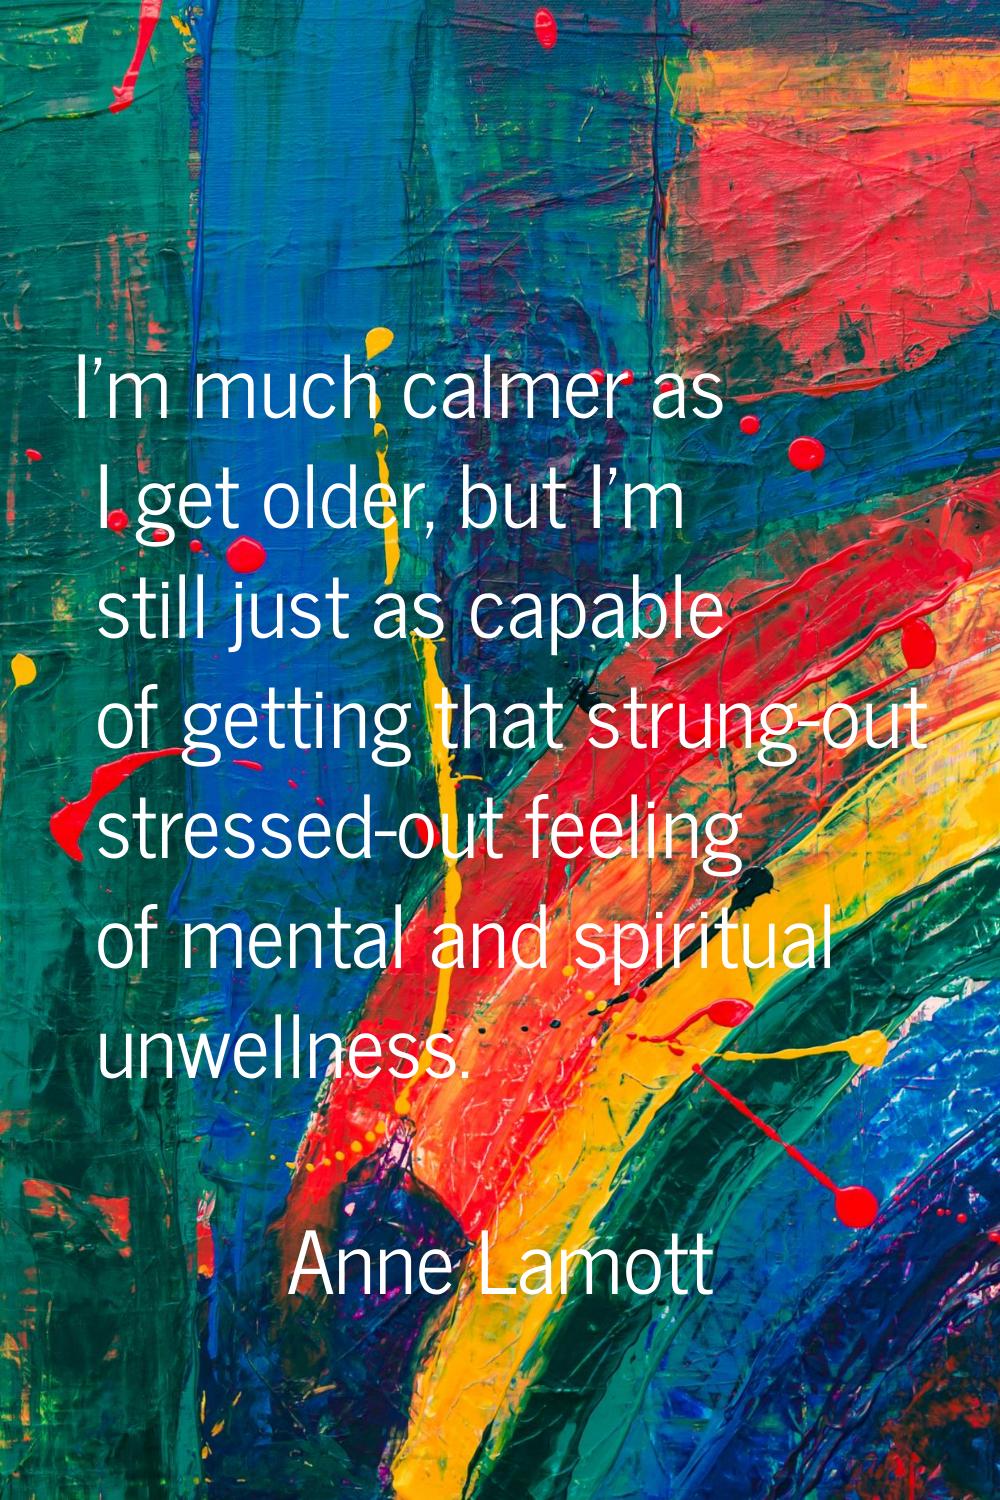 I'm much calmer as I get older, but I'm still just as capable of getting that strung-out stressed-o